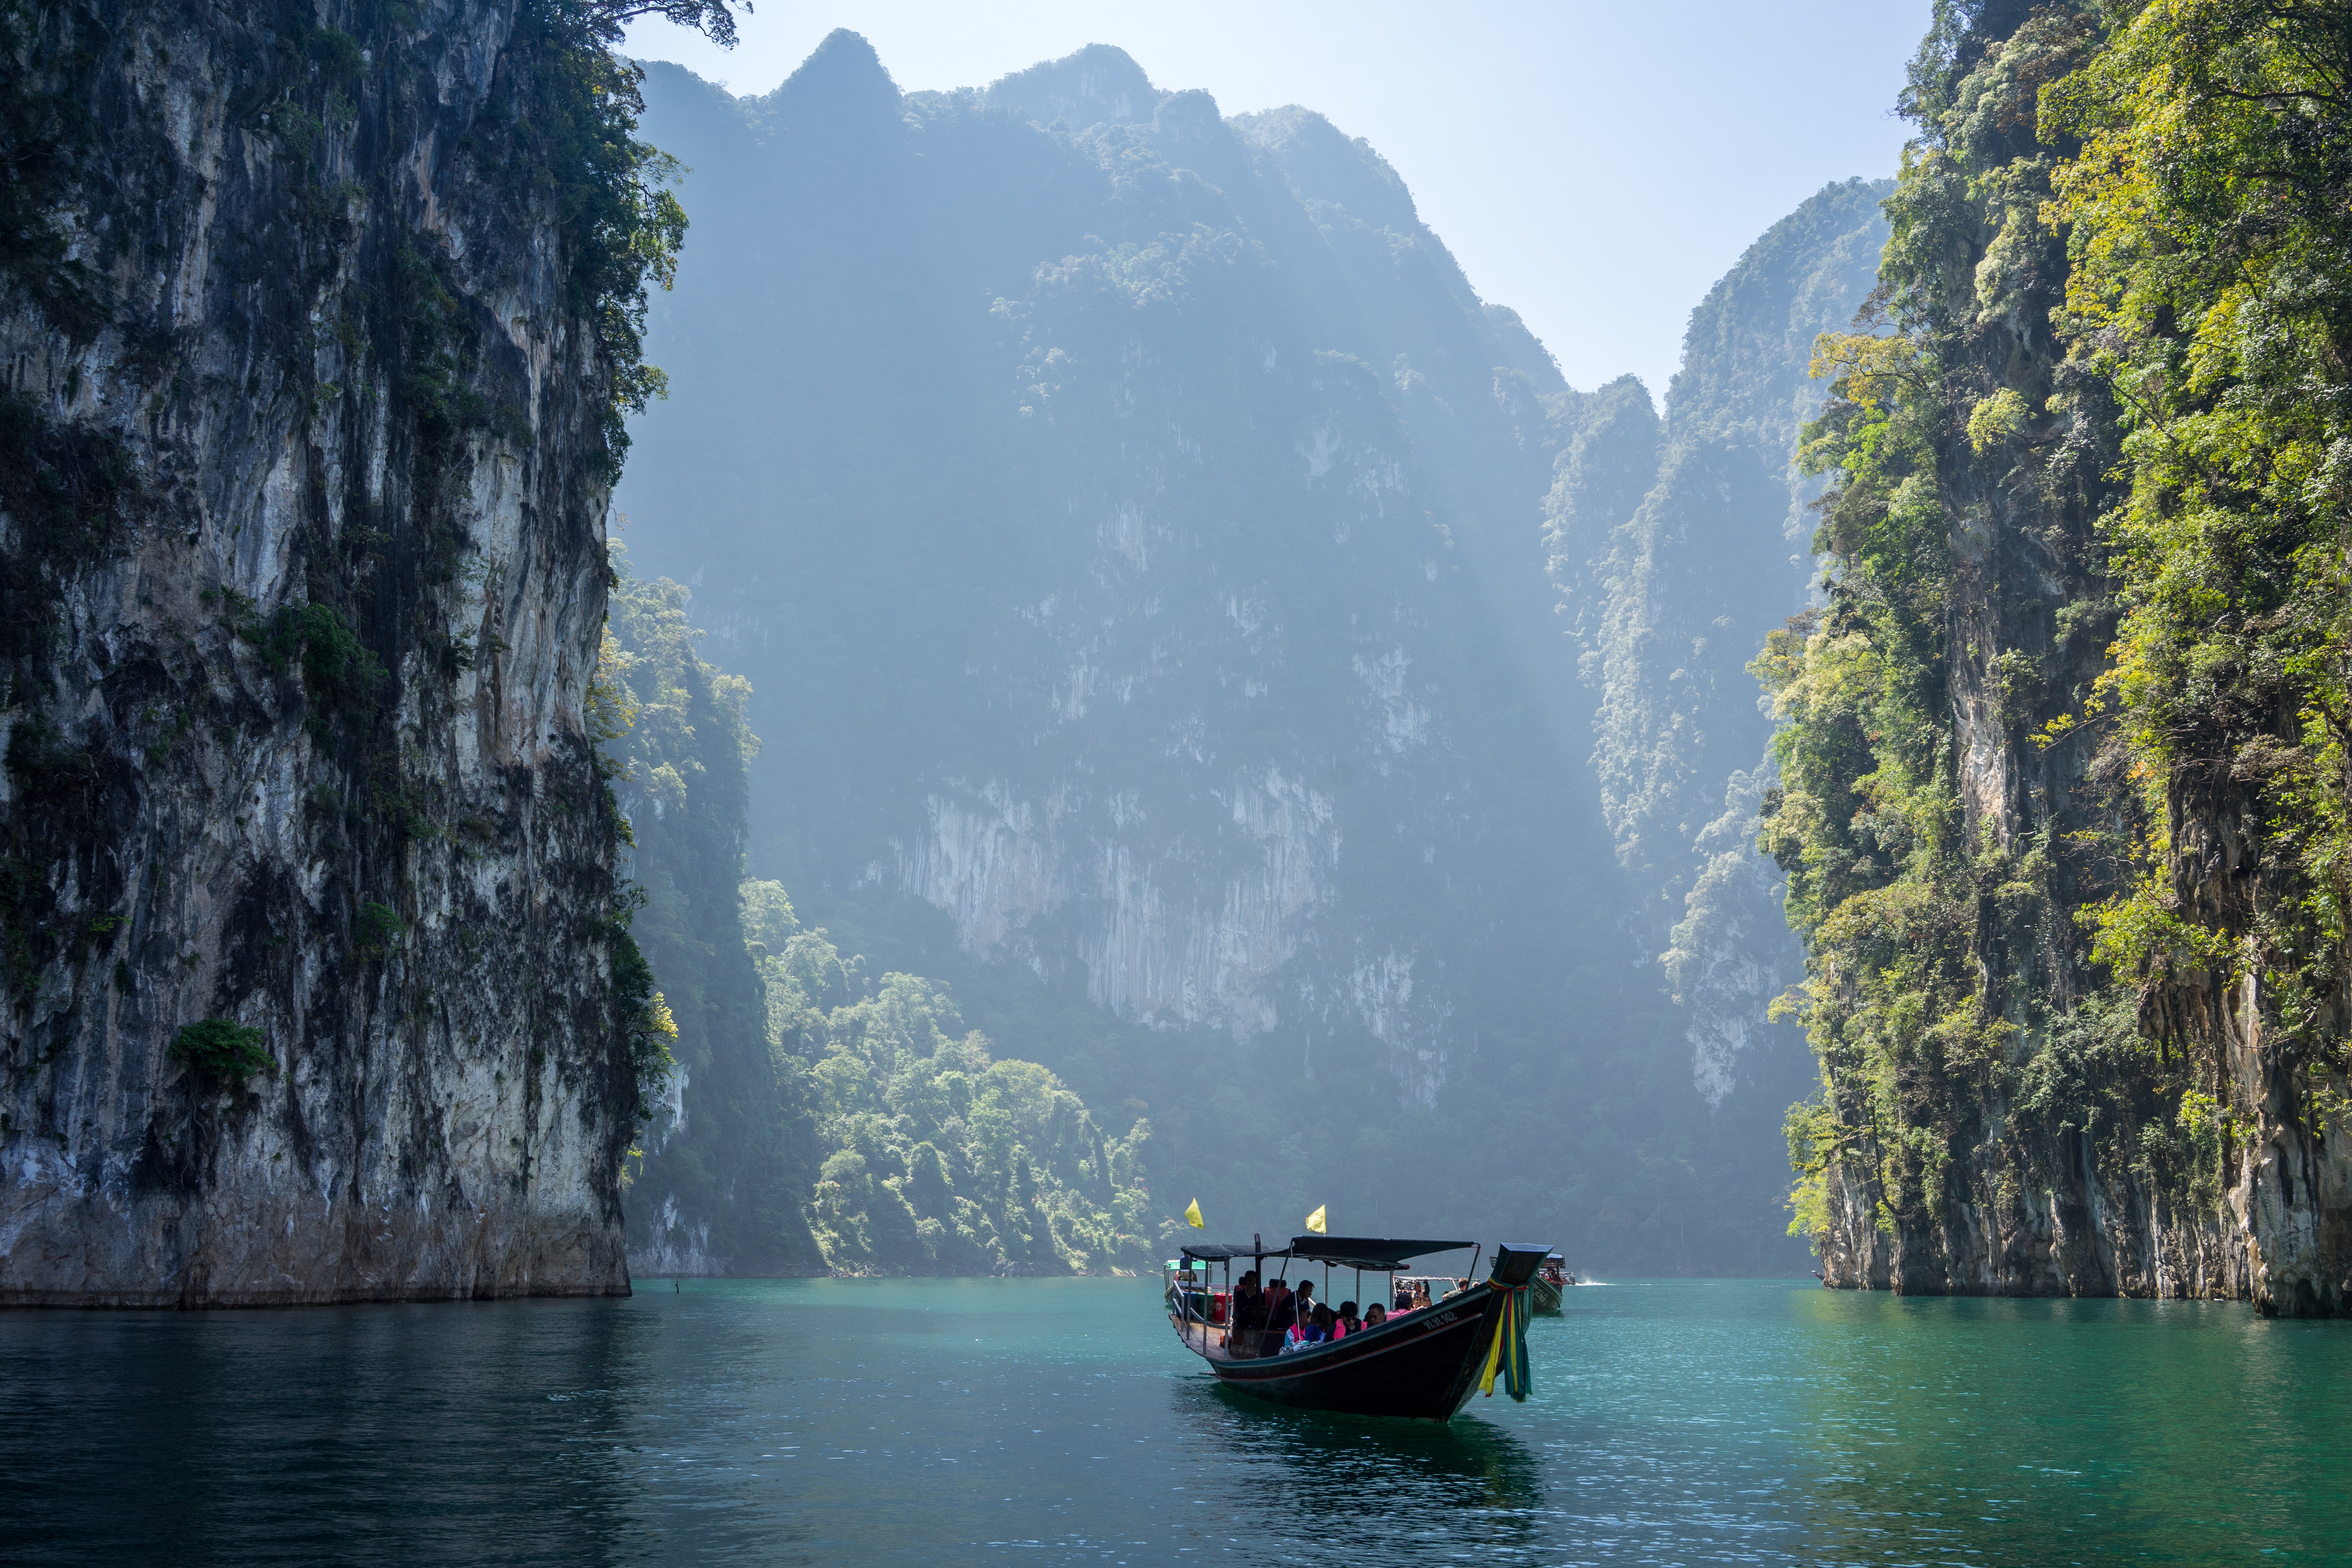 General 6000x4000 river nature boat vehicle water Tourism Halong Bay Vietnam Asia